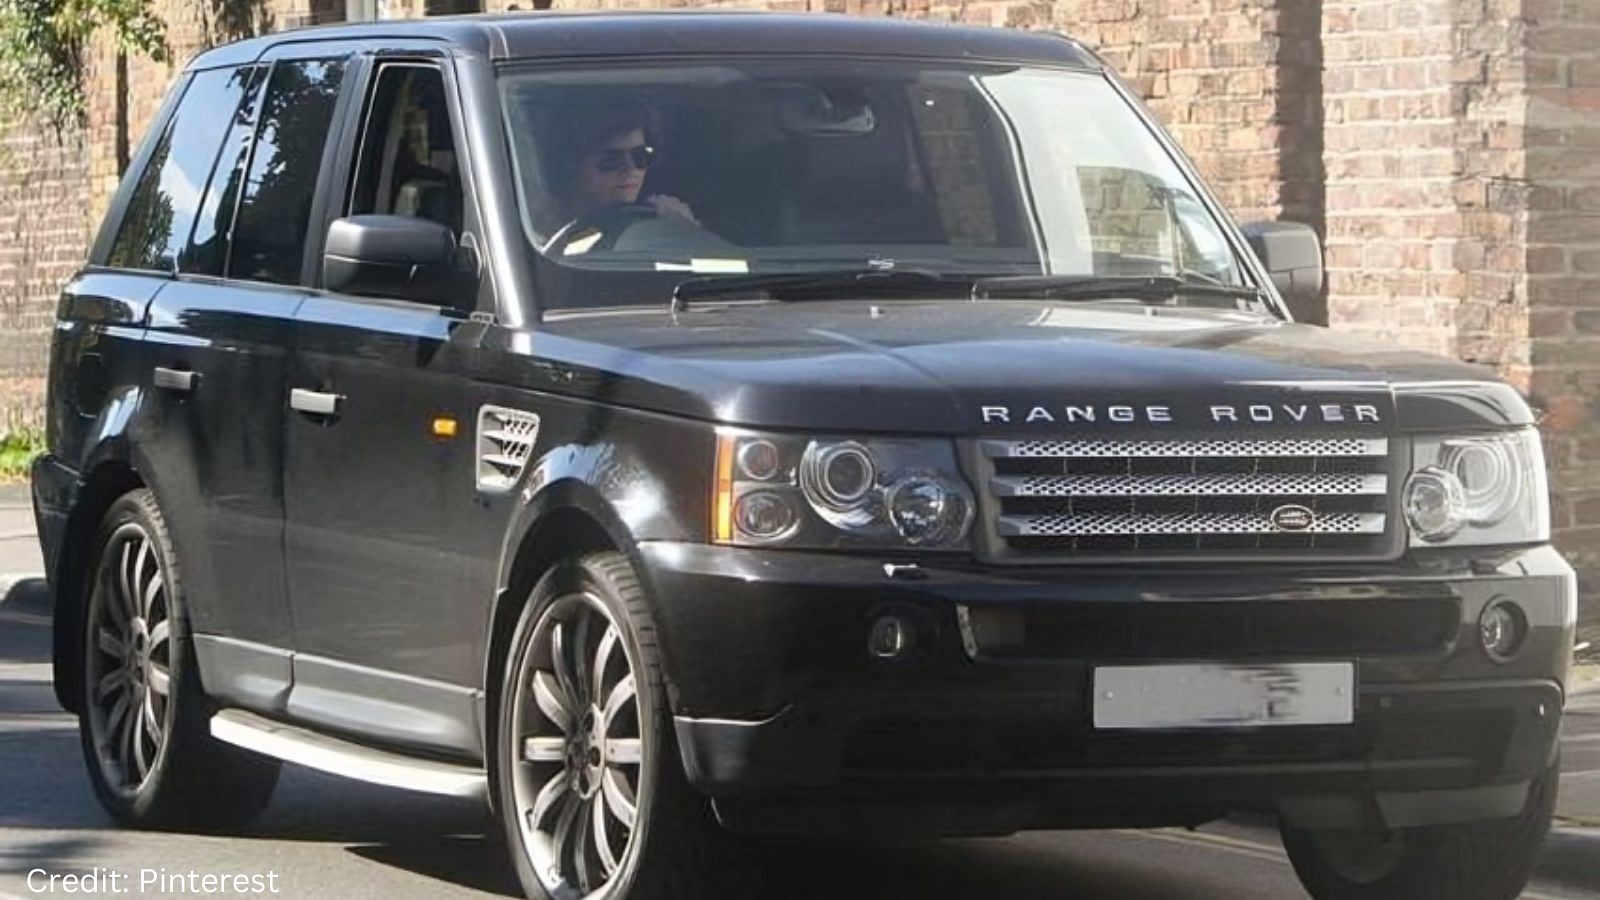 Harry Styles with a Land Rover Range Rover